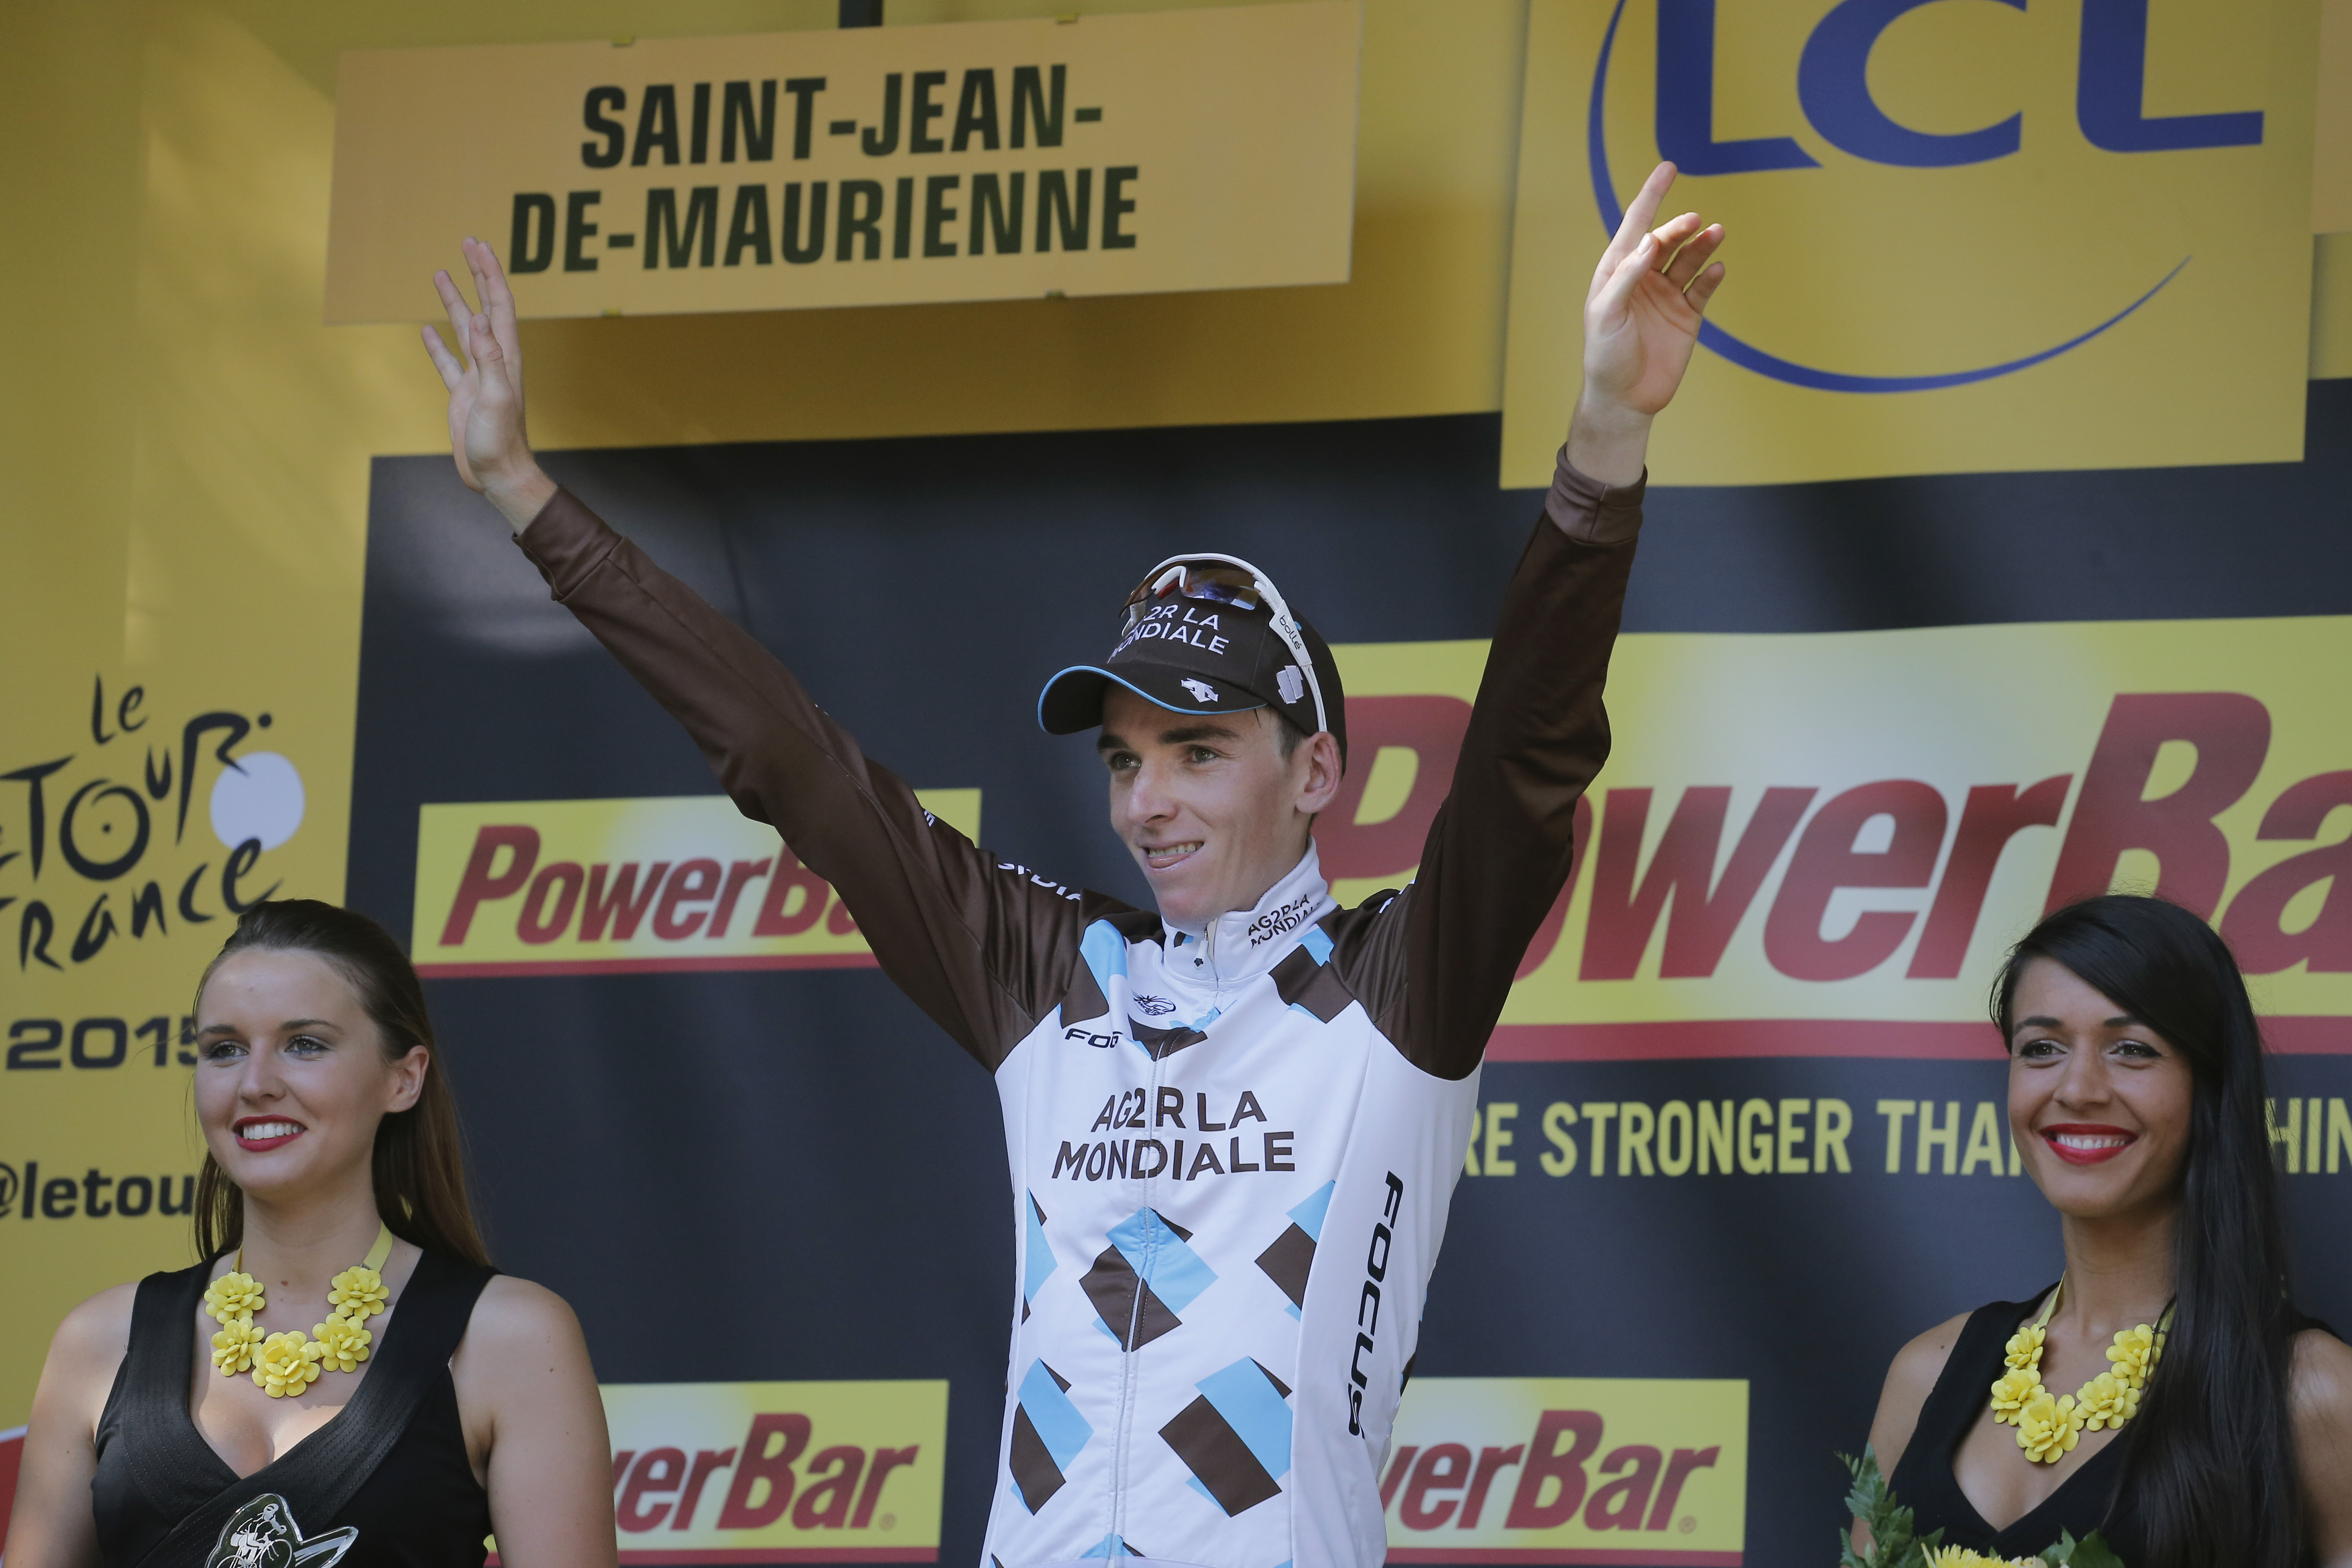 Stage winner Romain Bardet of France celebrates on the podium at the 18th stage of the Tour de France. Photo: AP